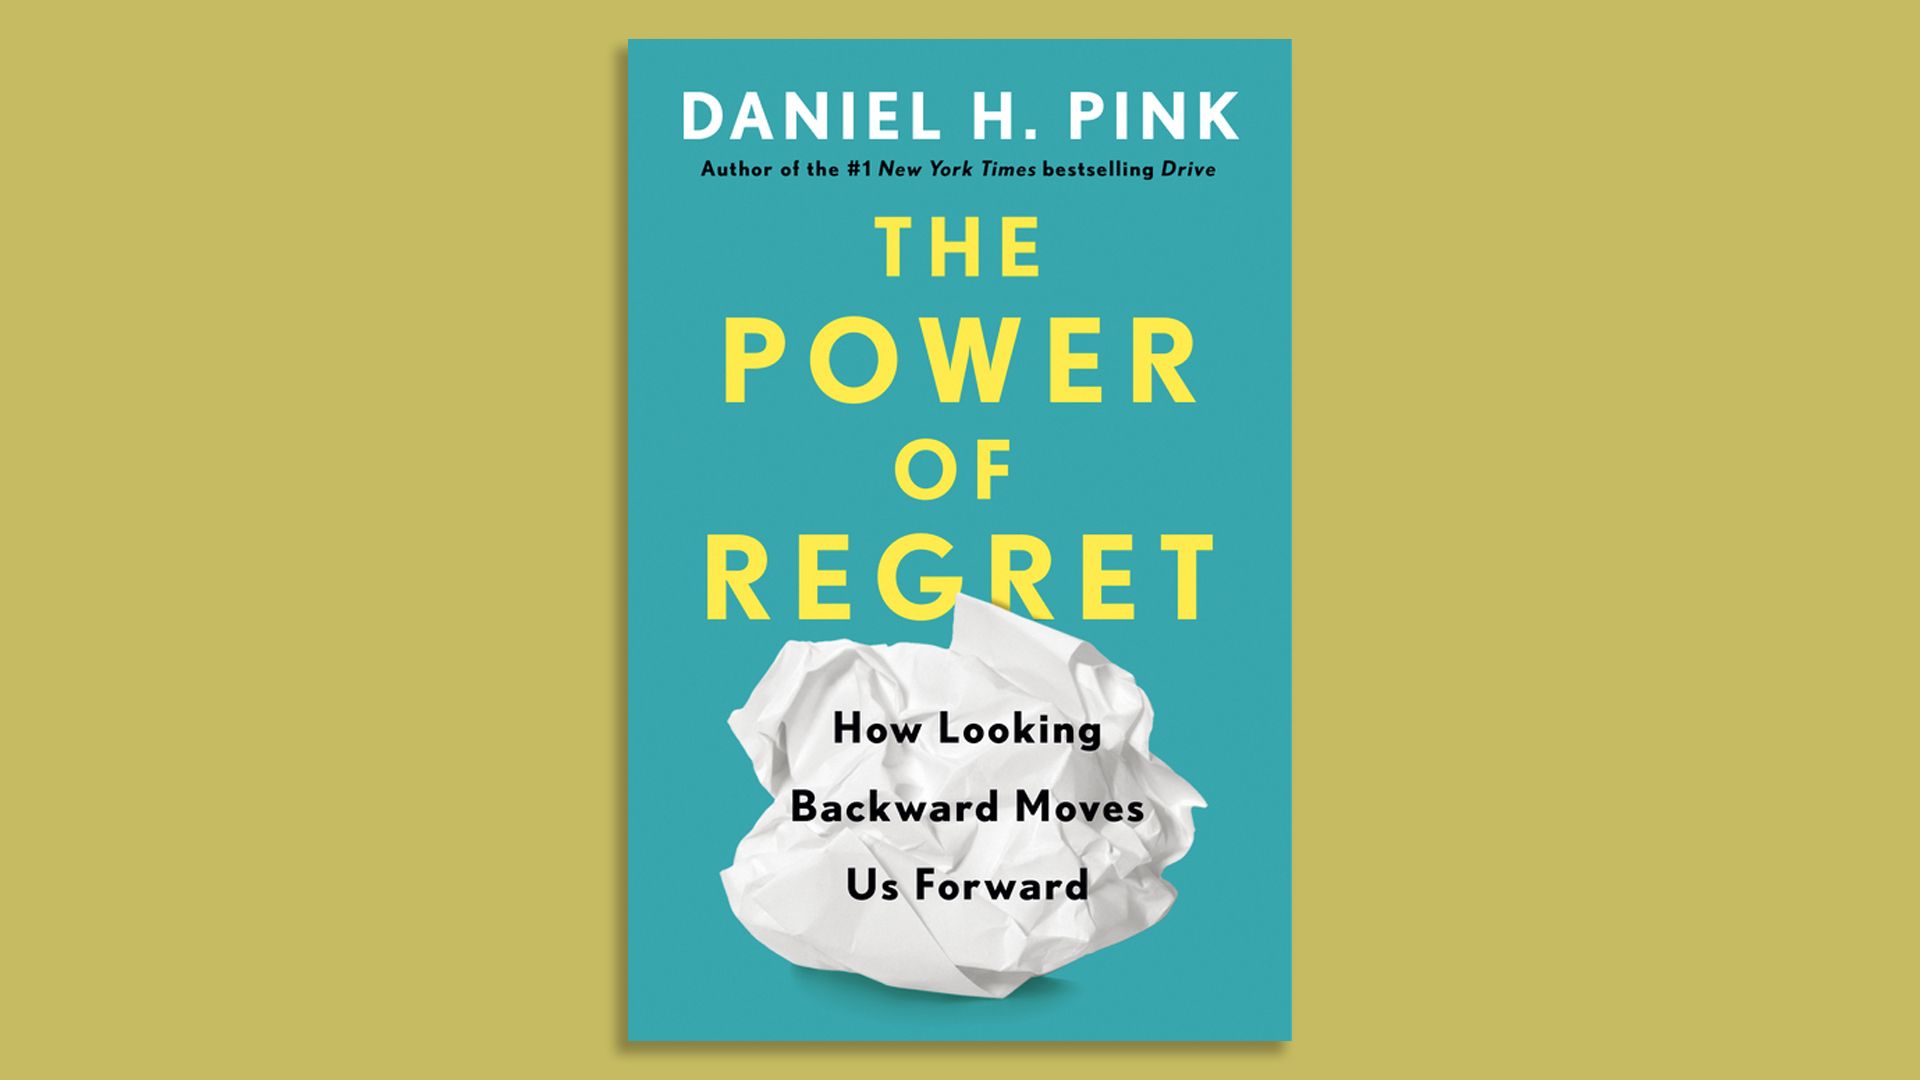 The cover of Daniel H. Pink's book "The Power of Regret"